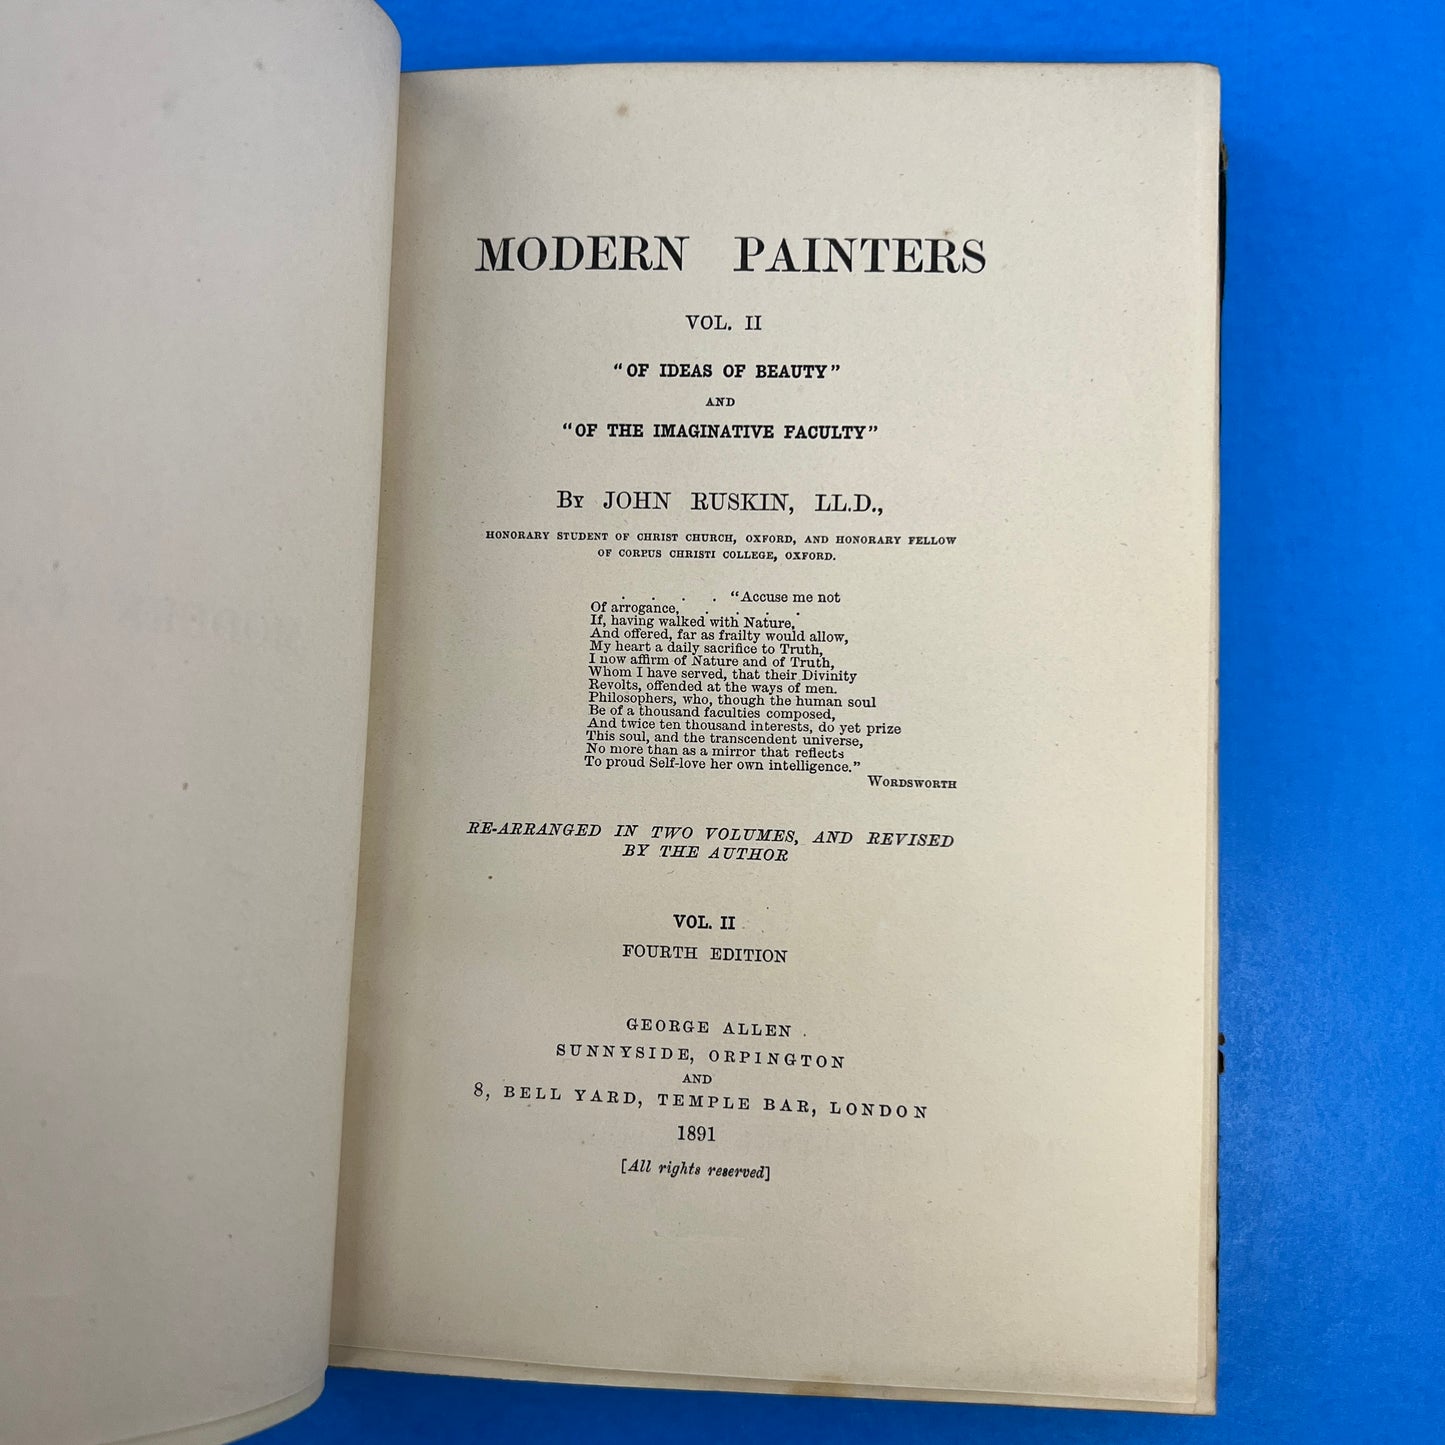 Modern Painters Vol II: Of Ideas of Beauty & Of The Imaginative Faculty